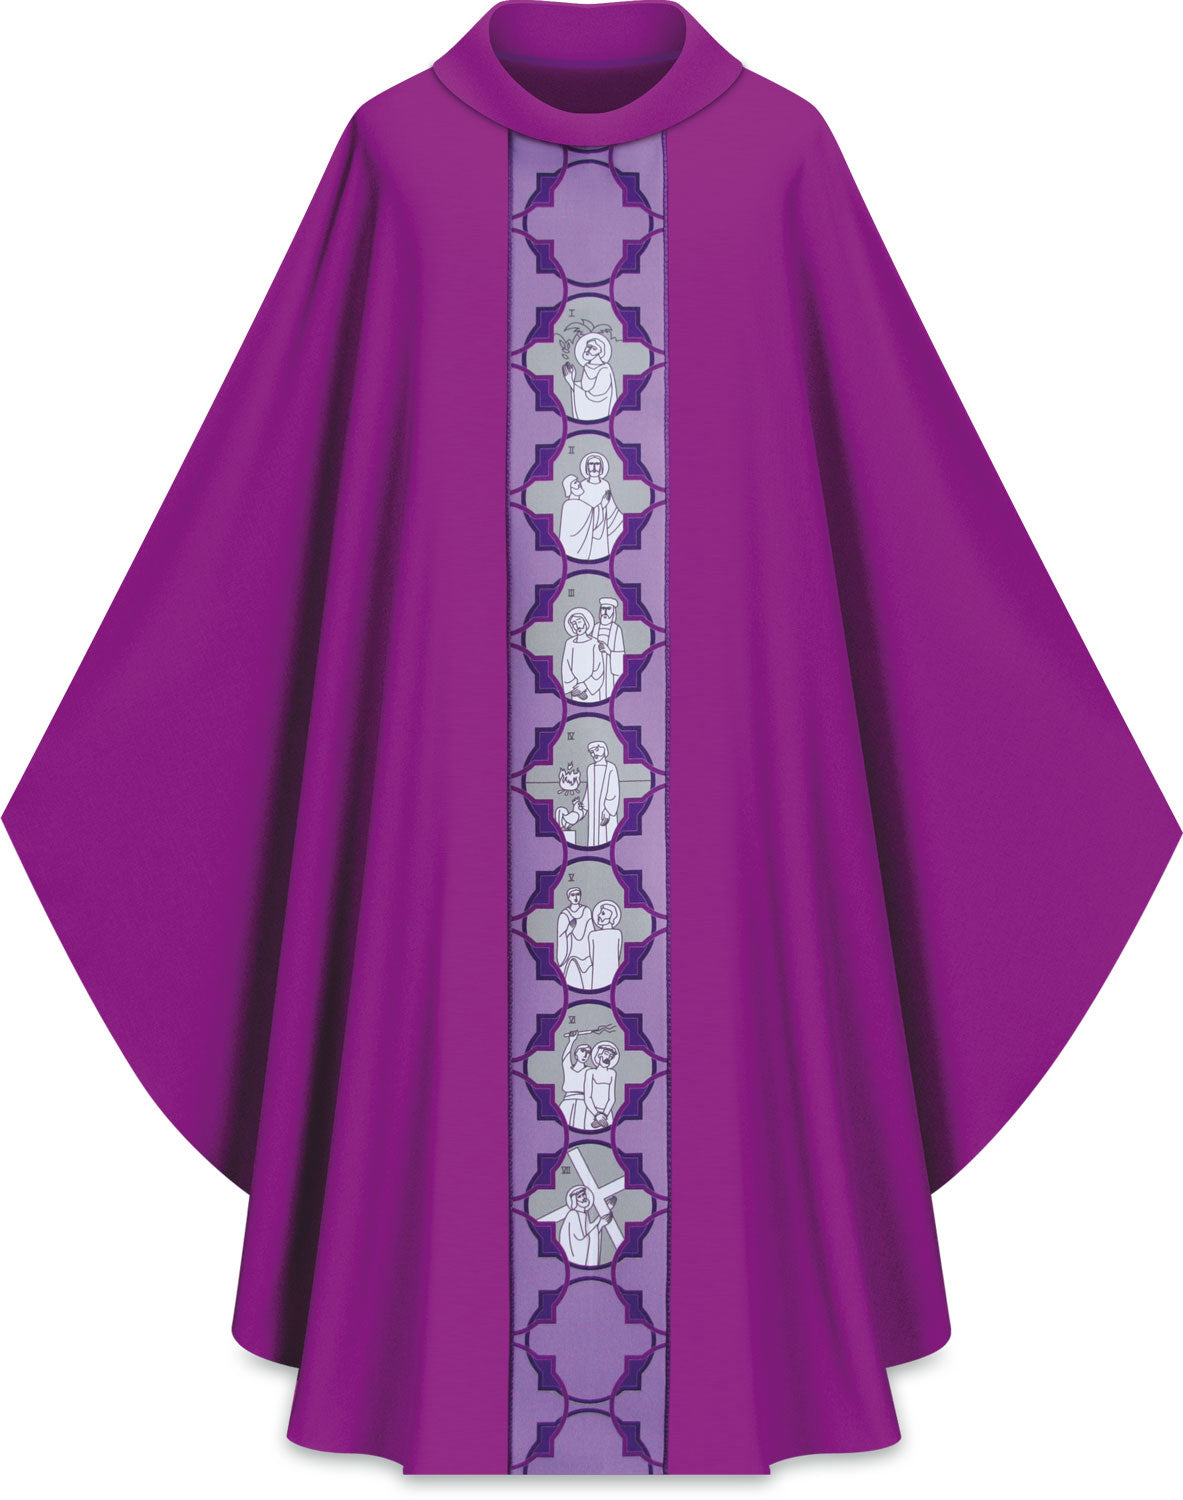 stations-of-the-cross-chasuble-5222.jpg